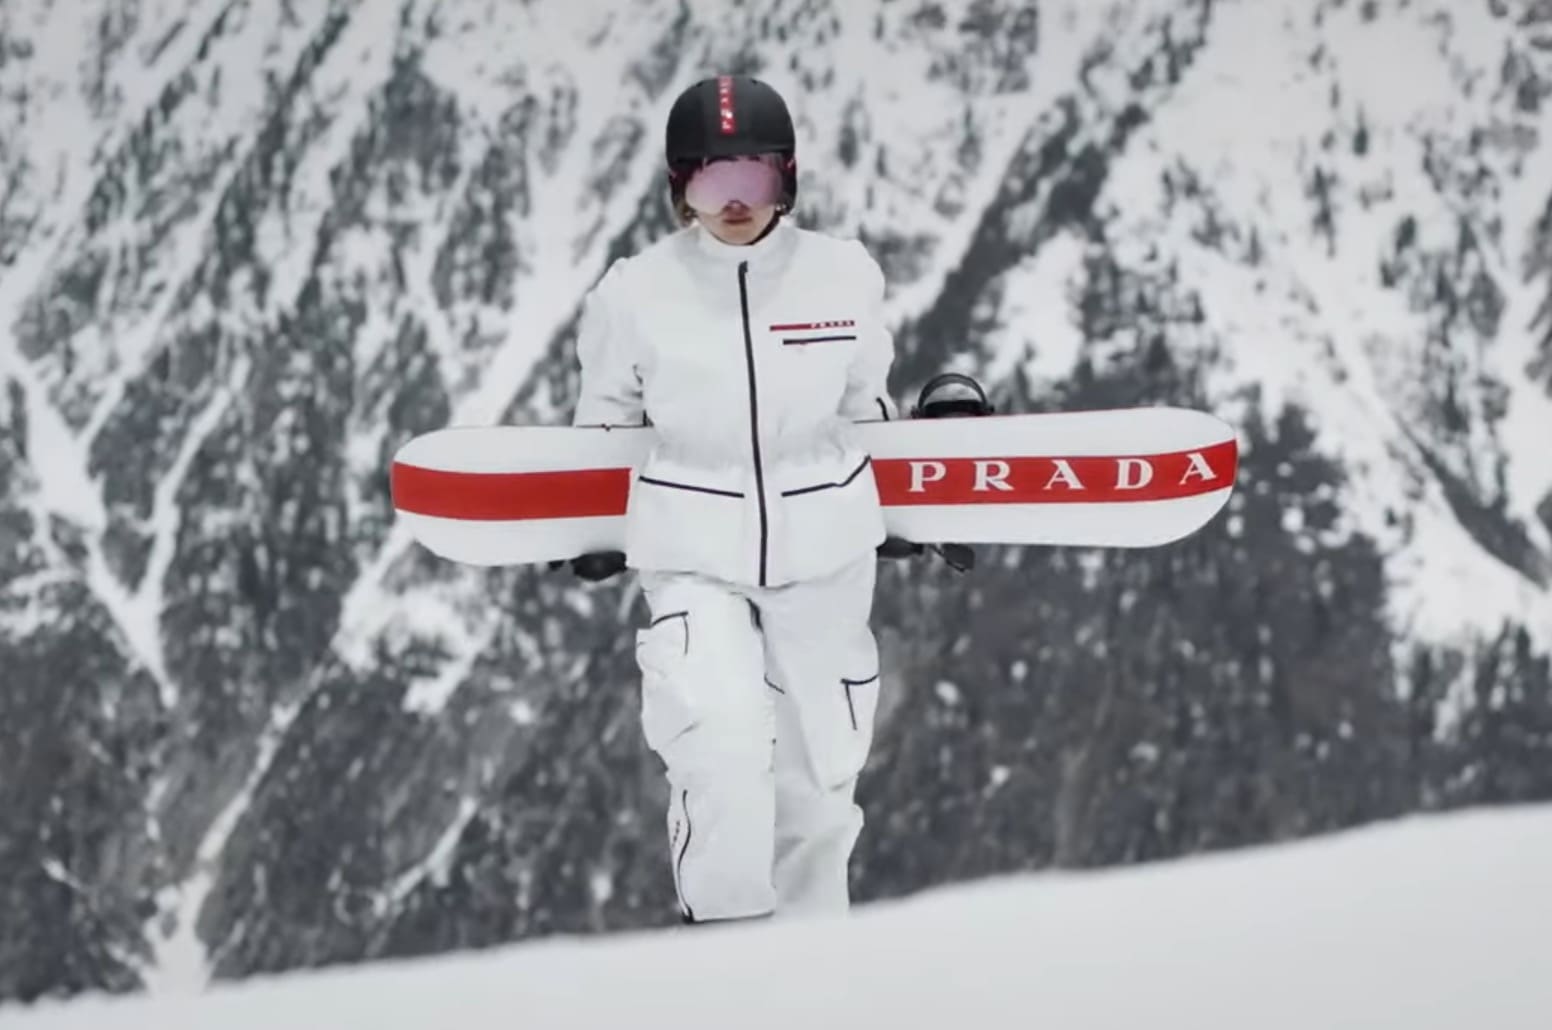 Did You Know PRADA Made Snow Gear? | Unofficial Networks